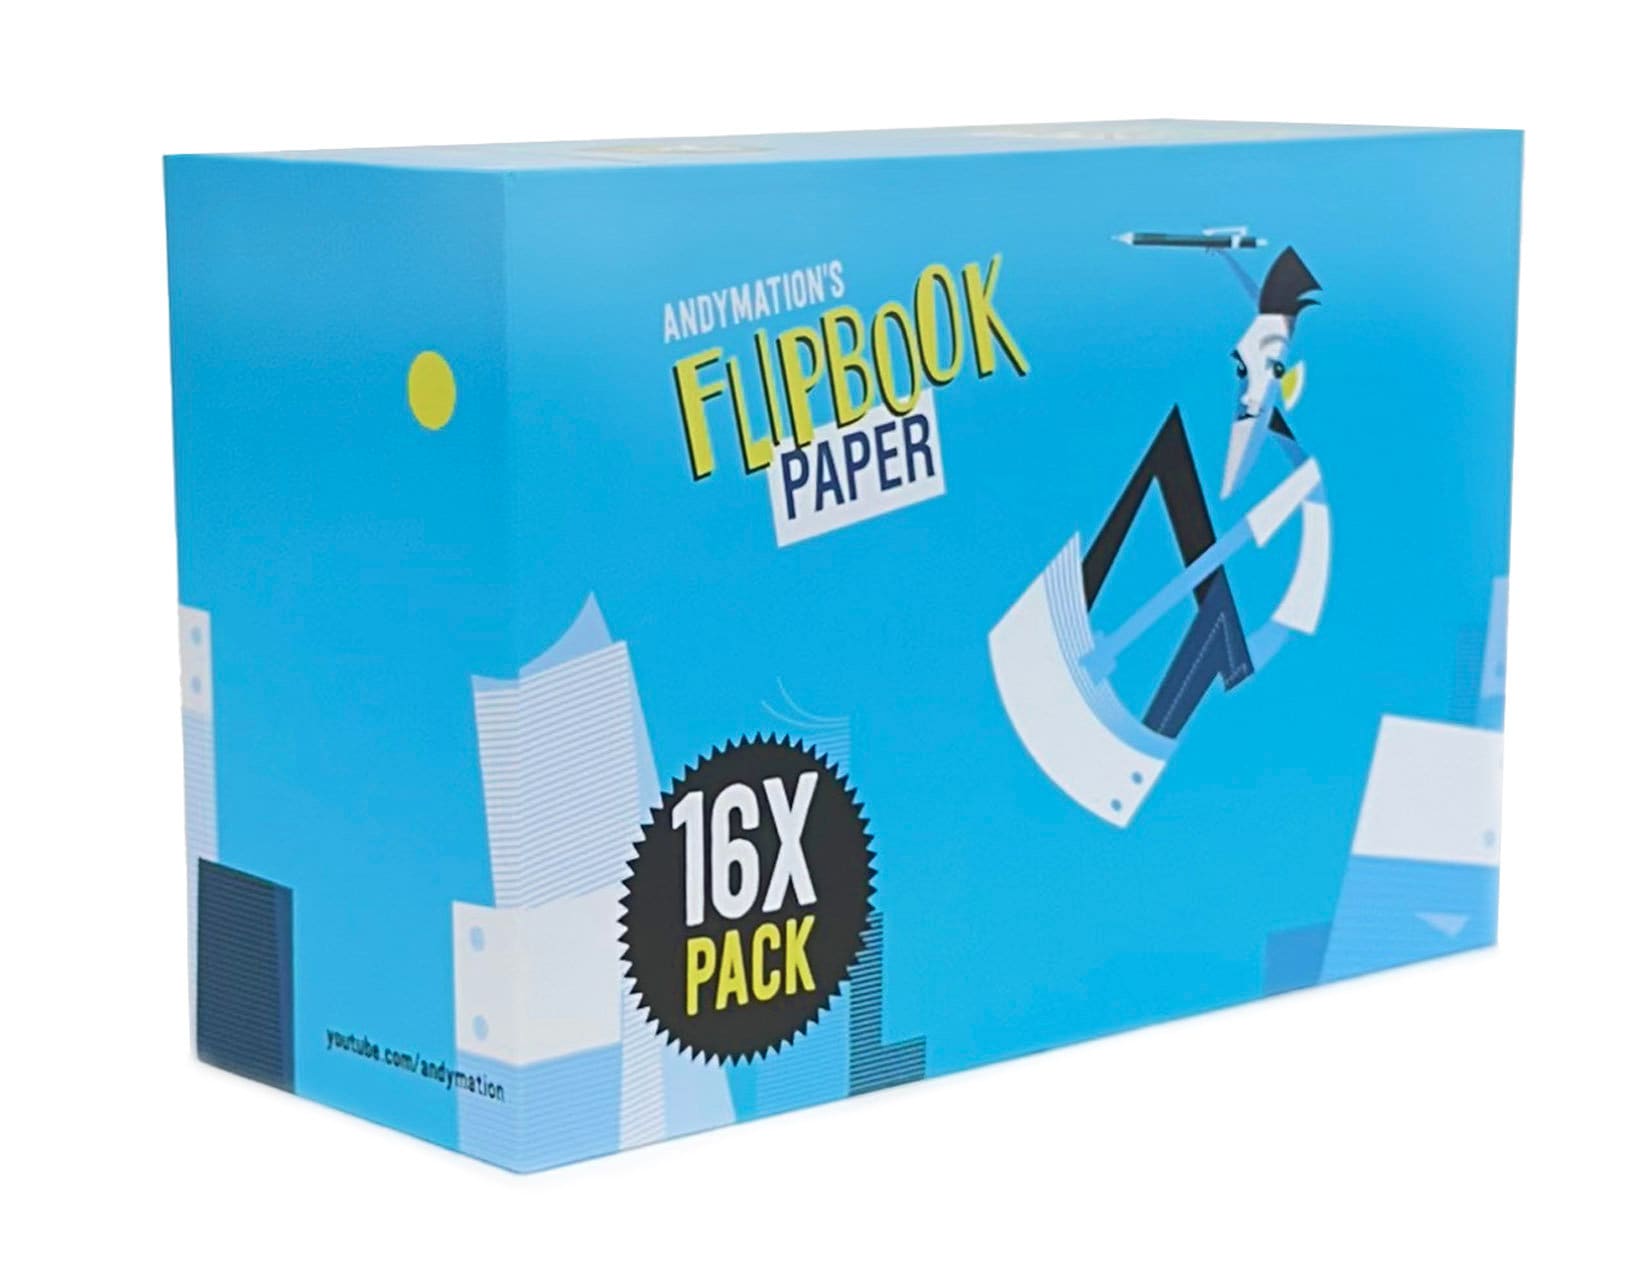 Andymation 16X Paper Pack, Replacement Flipbook Paper for All